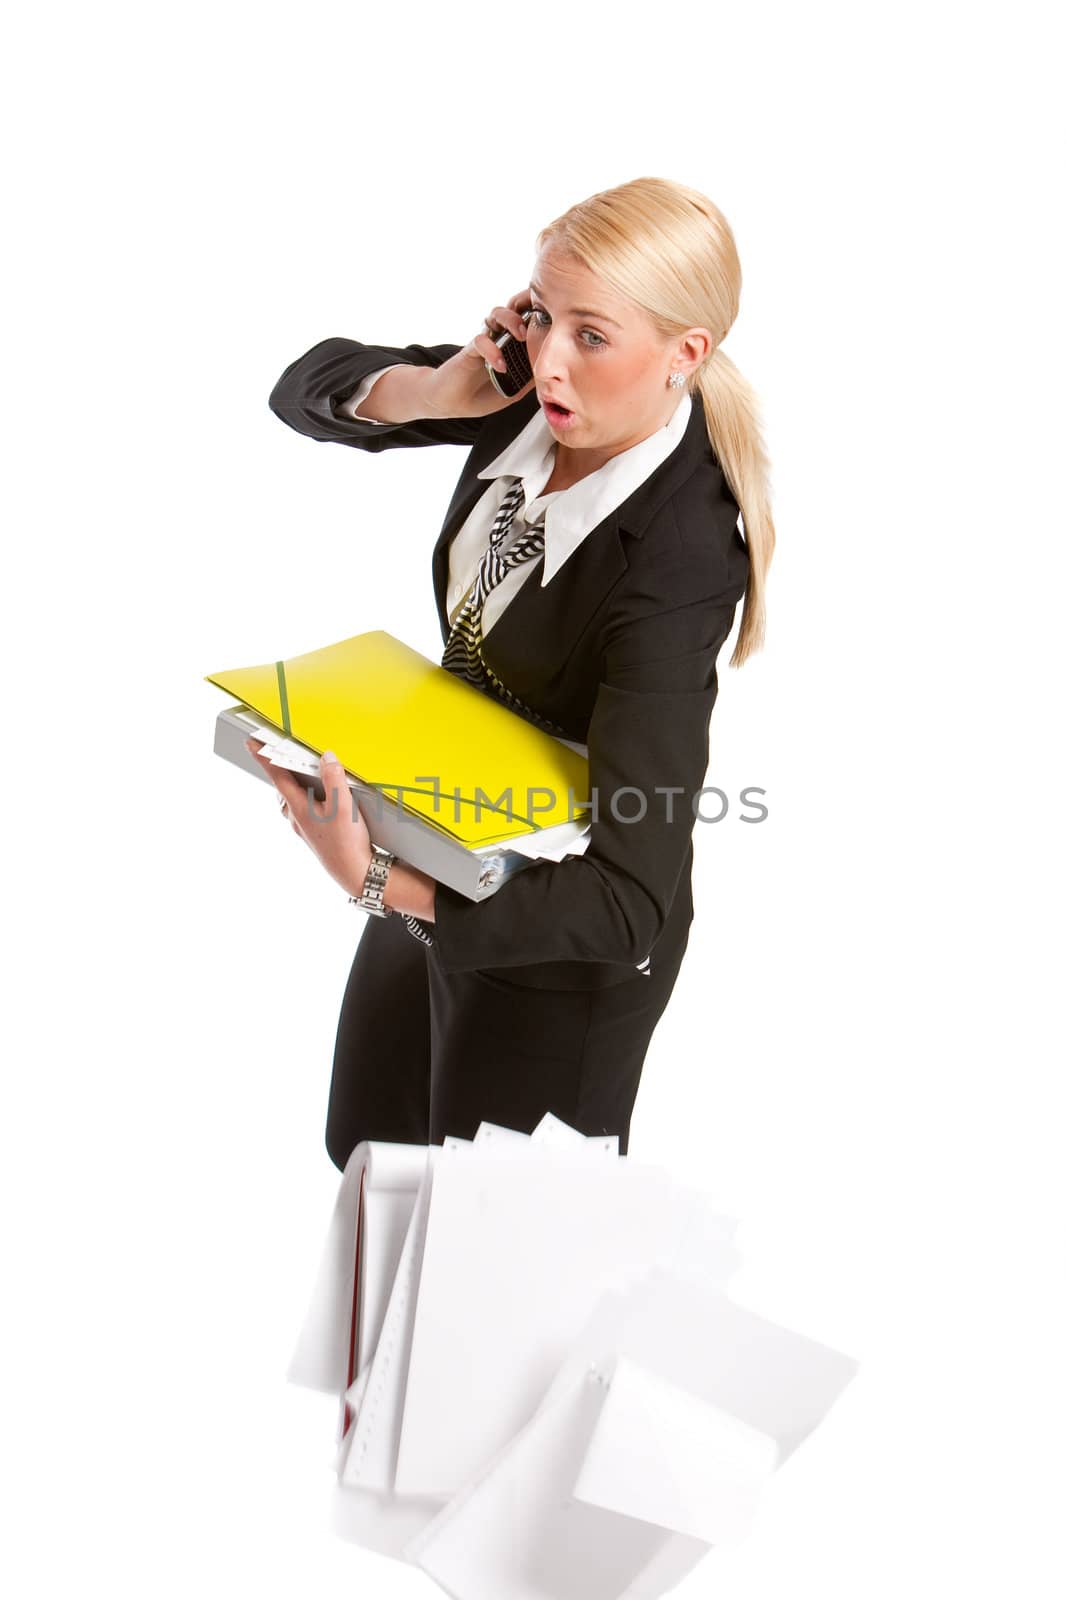 Businesswoman on the phone trying to juggle her papers 